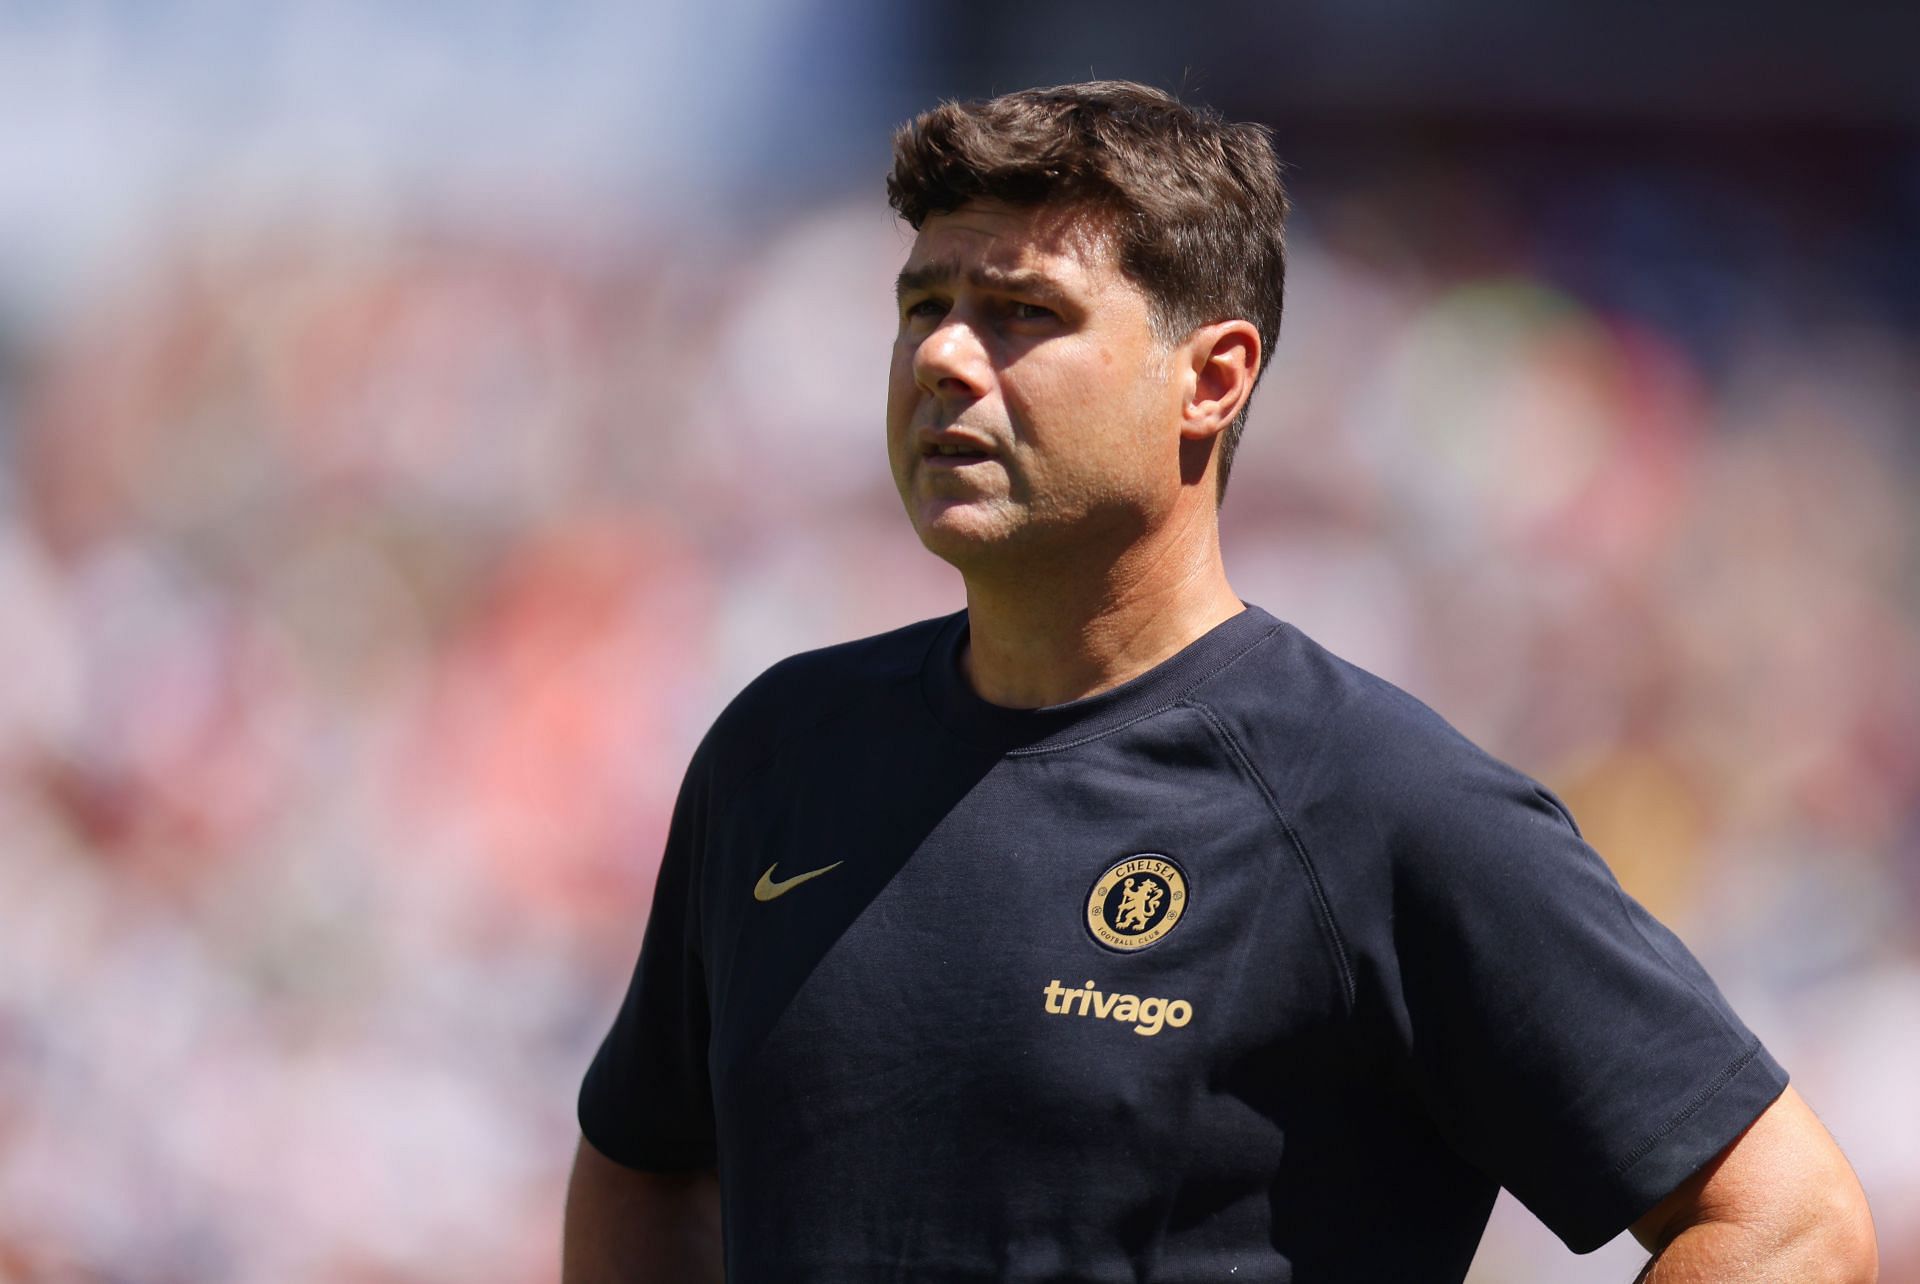 Pochettino trusted Kepa but the goalkeeper moved to Madrid